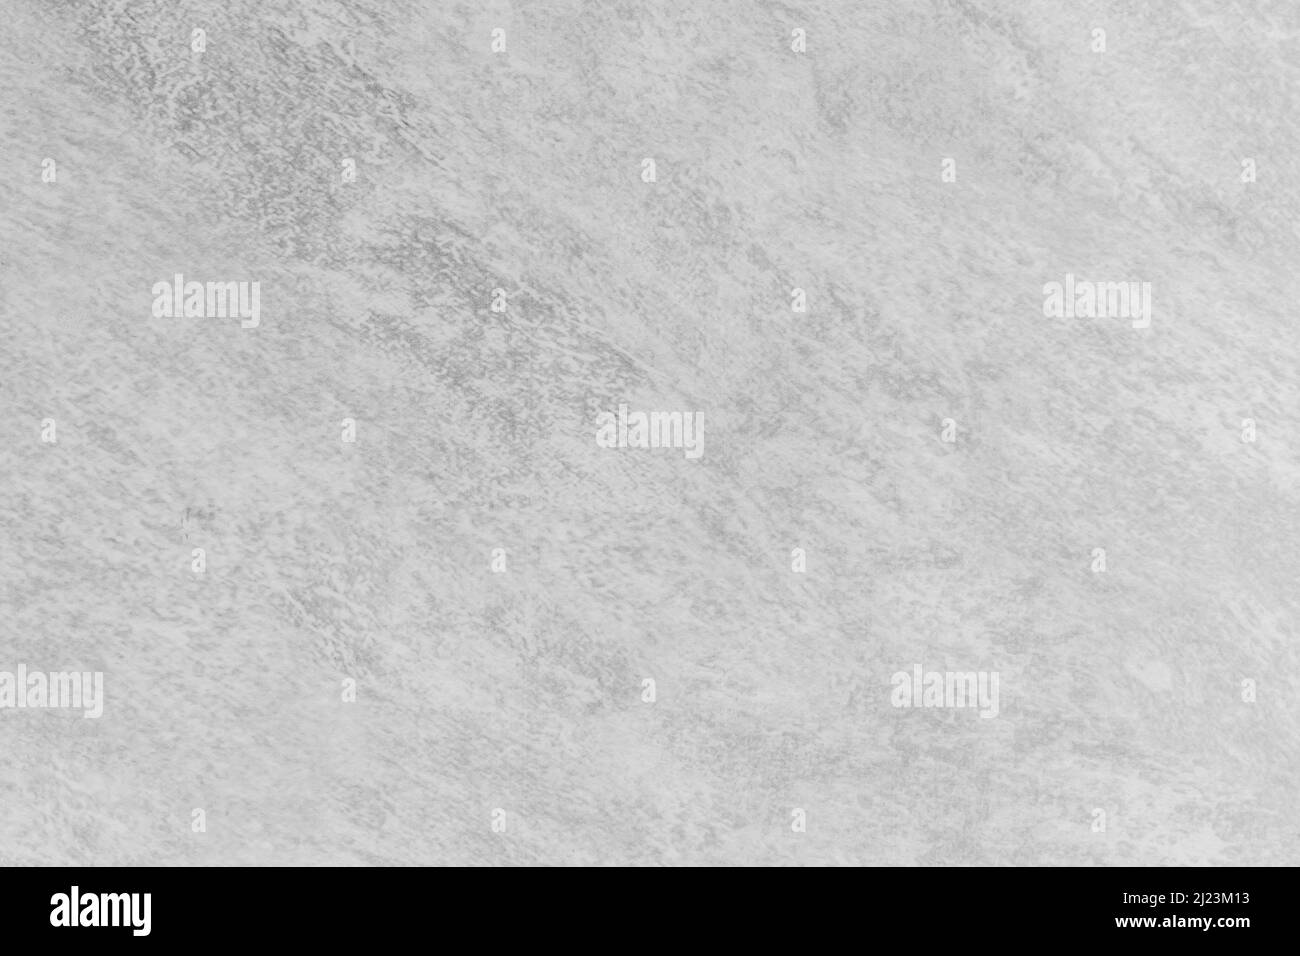 White Grey Abstract Stone Tile Texture Background Floor Grunge Surface ...